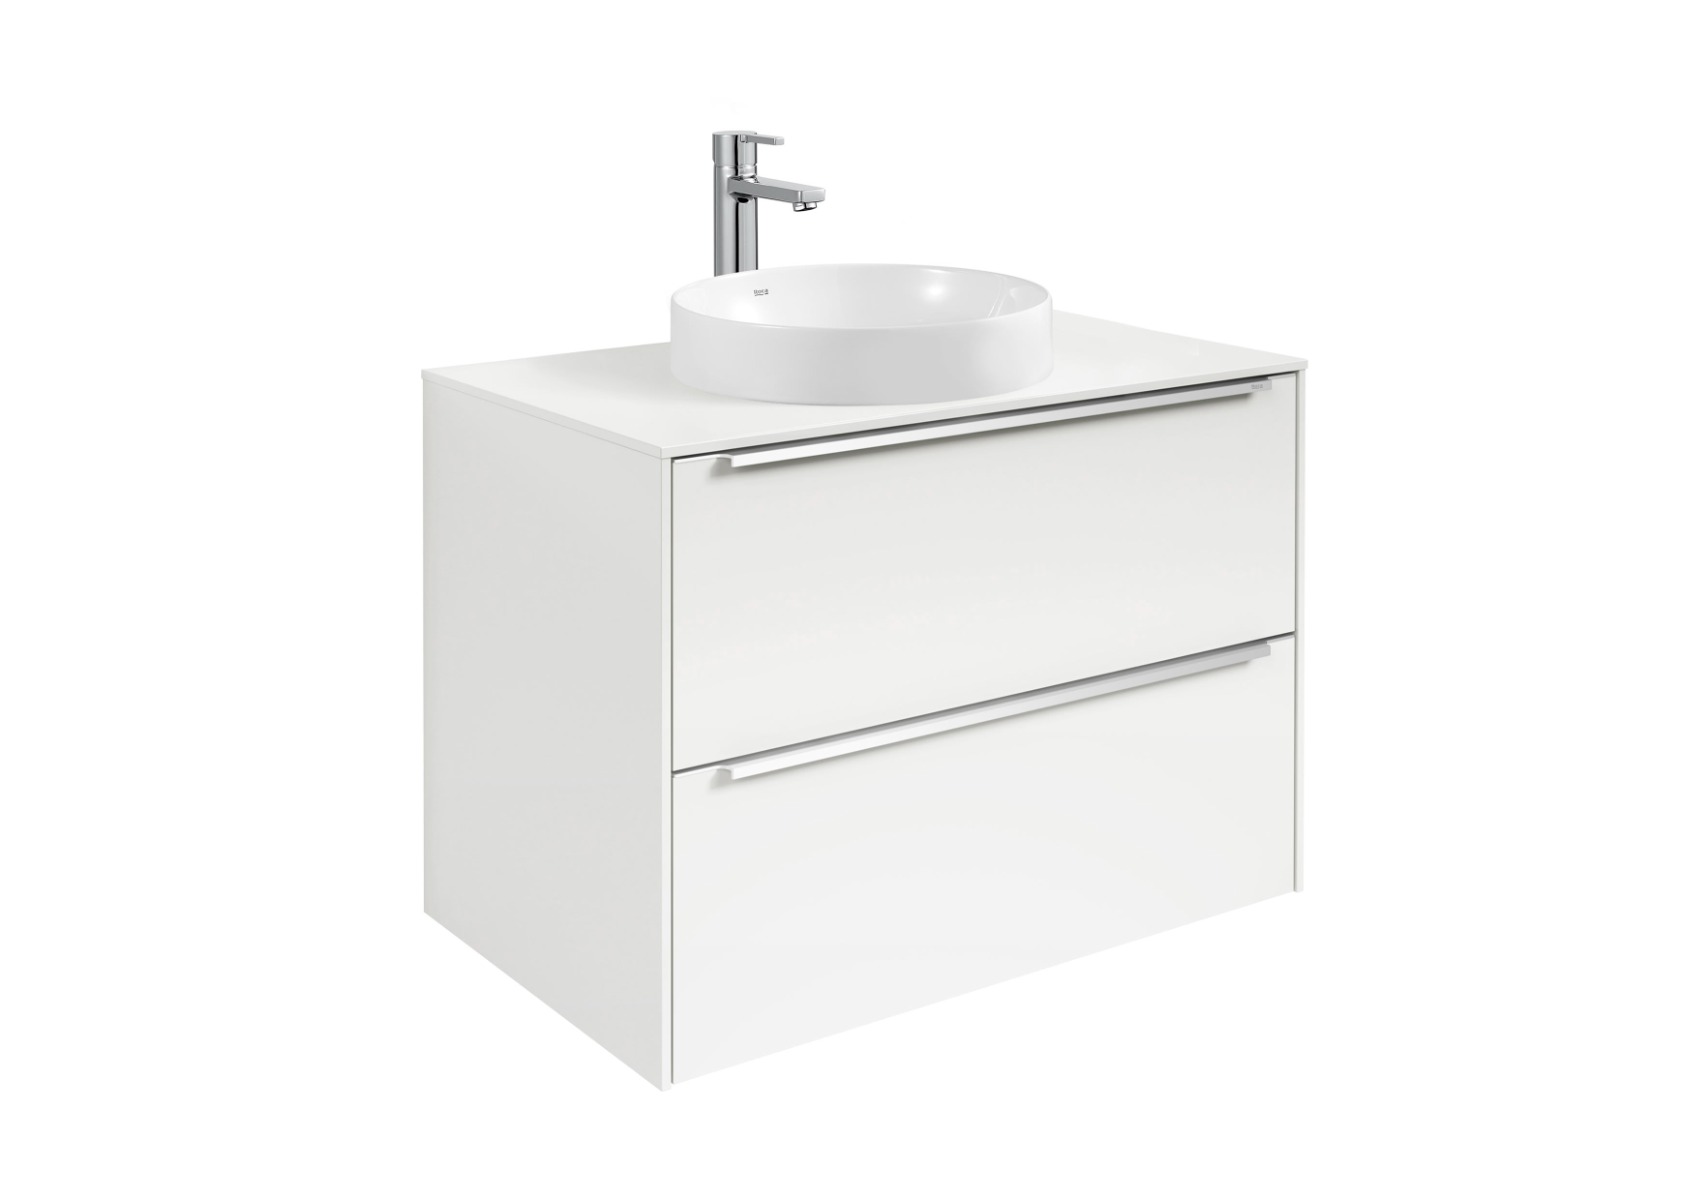 A857001806 + A857019806 Base unit for Soft or Round In Countertop basin